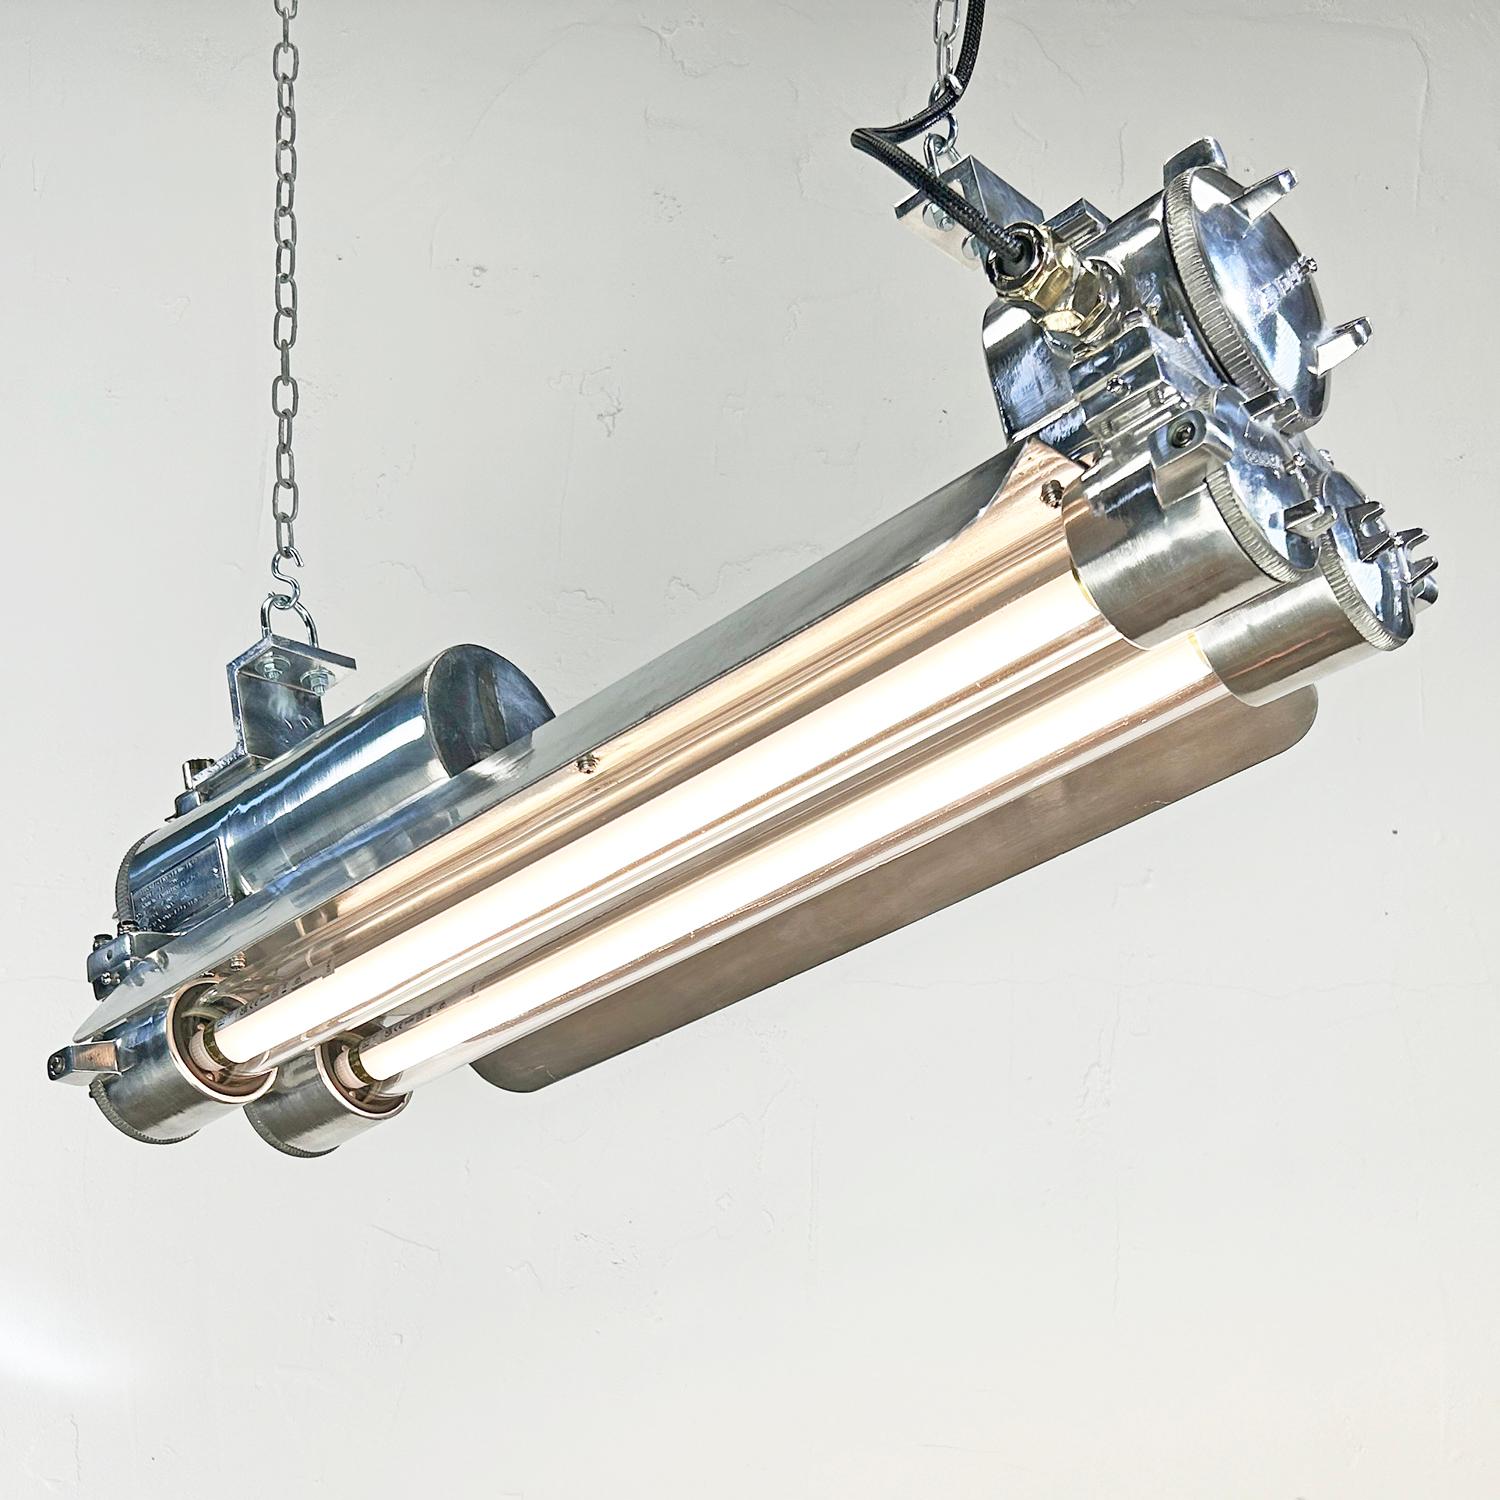 Korean flameproof strip light made by Daeyang circa 1978 with a polished finish.

Originally these would have illuminated hazardous areas on super tankers, cargo ships and military vessels such as engine rooms and areas where dangerous gases are